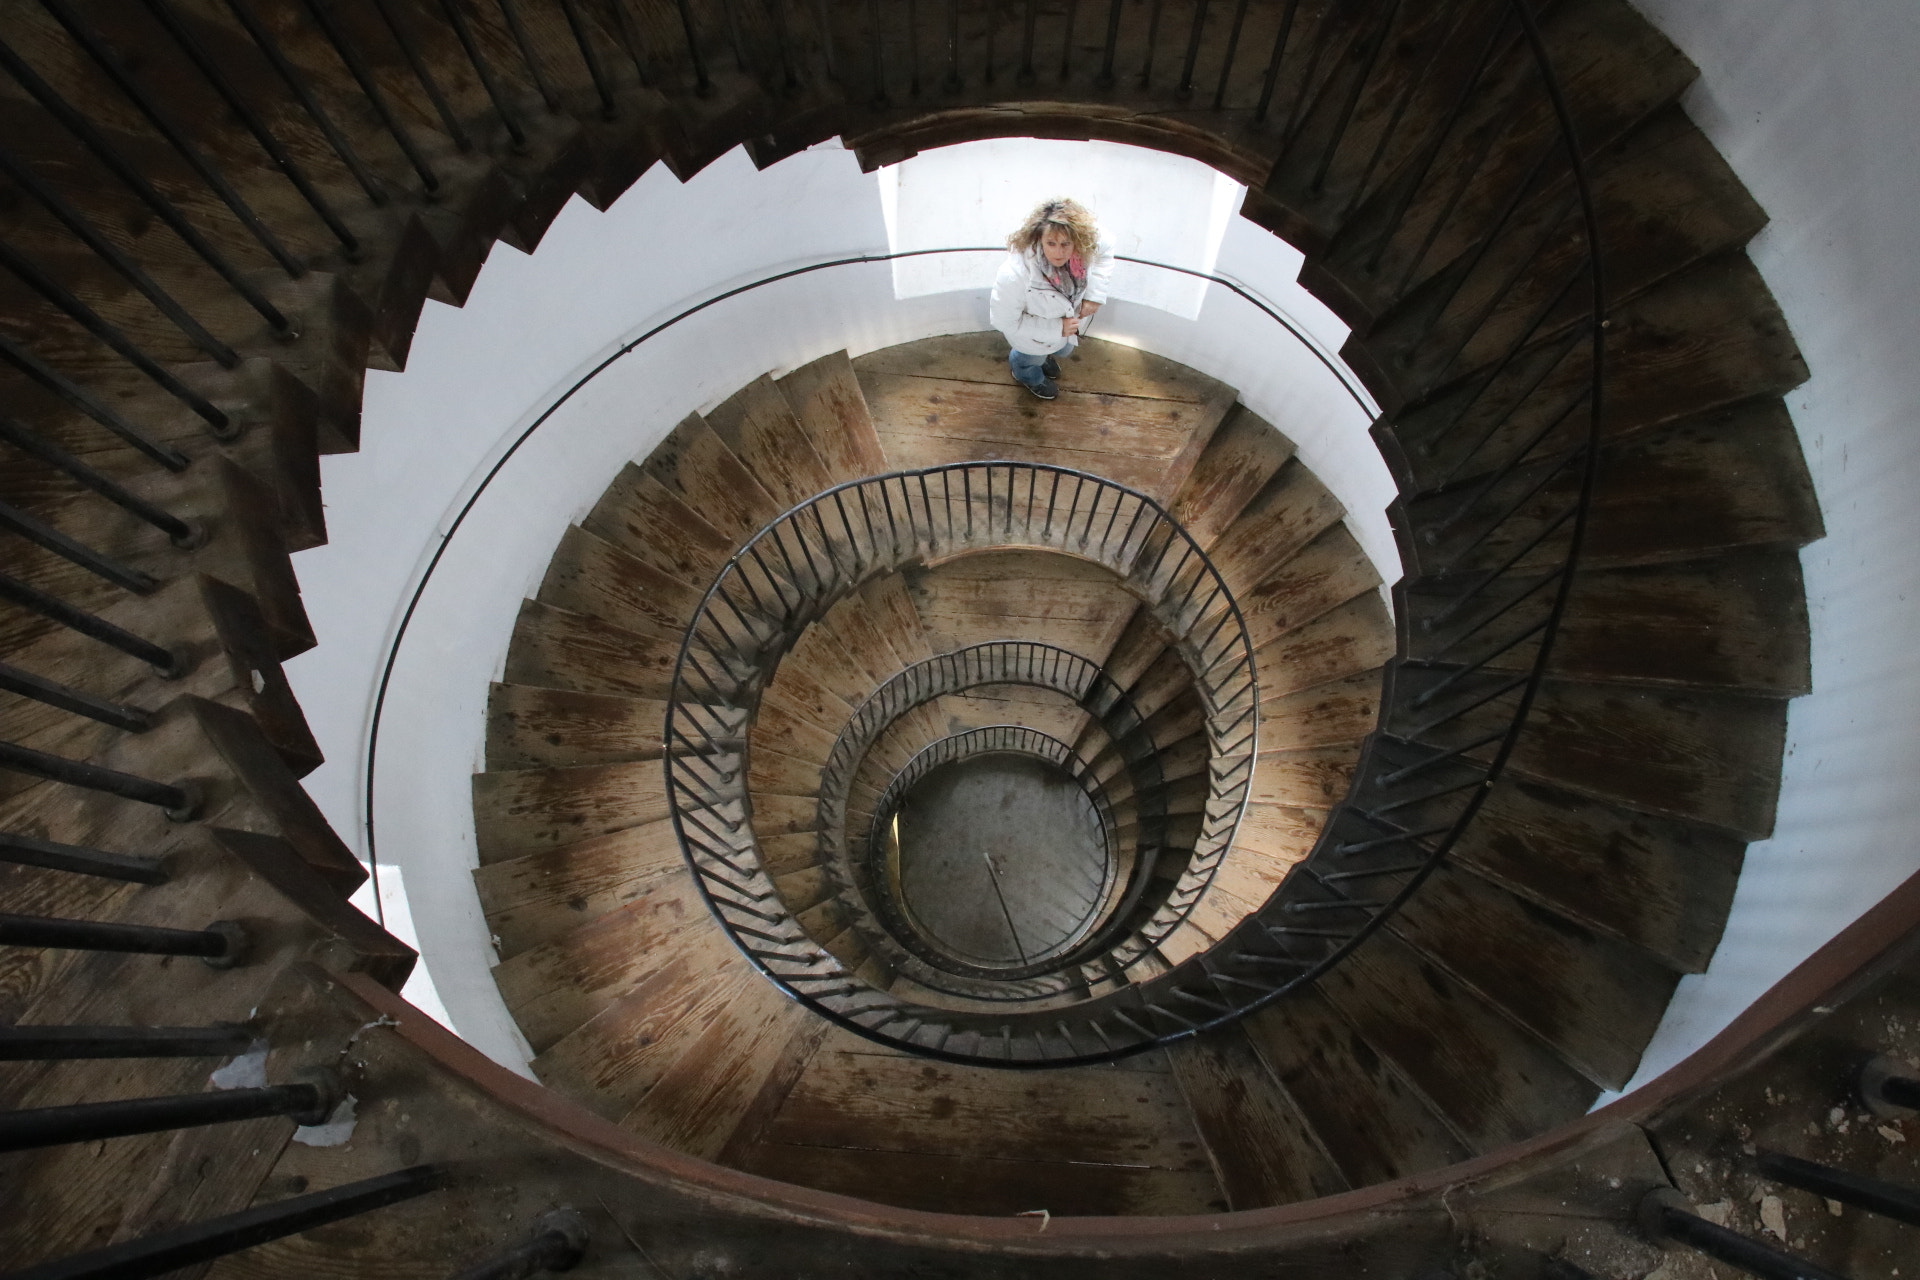 Canon EOS 80D + Sigma 17-70mm F2.8-4 DC Macro OS HSM | C sample photo. Spiral staircase inside an old tower photography